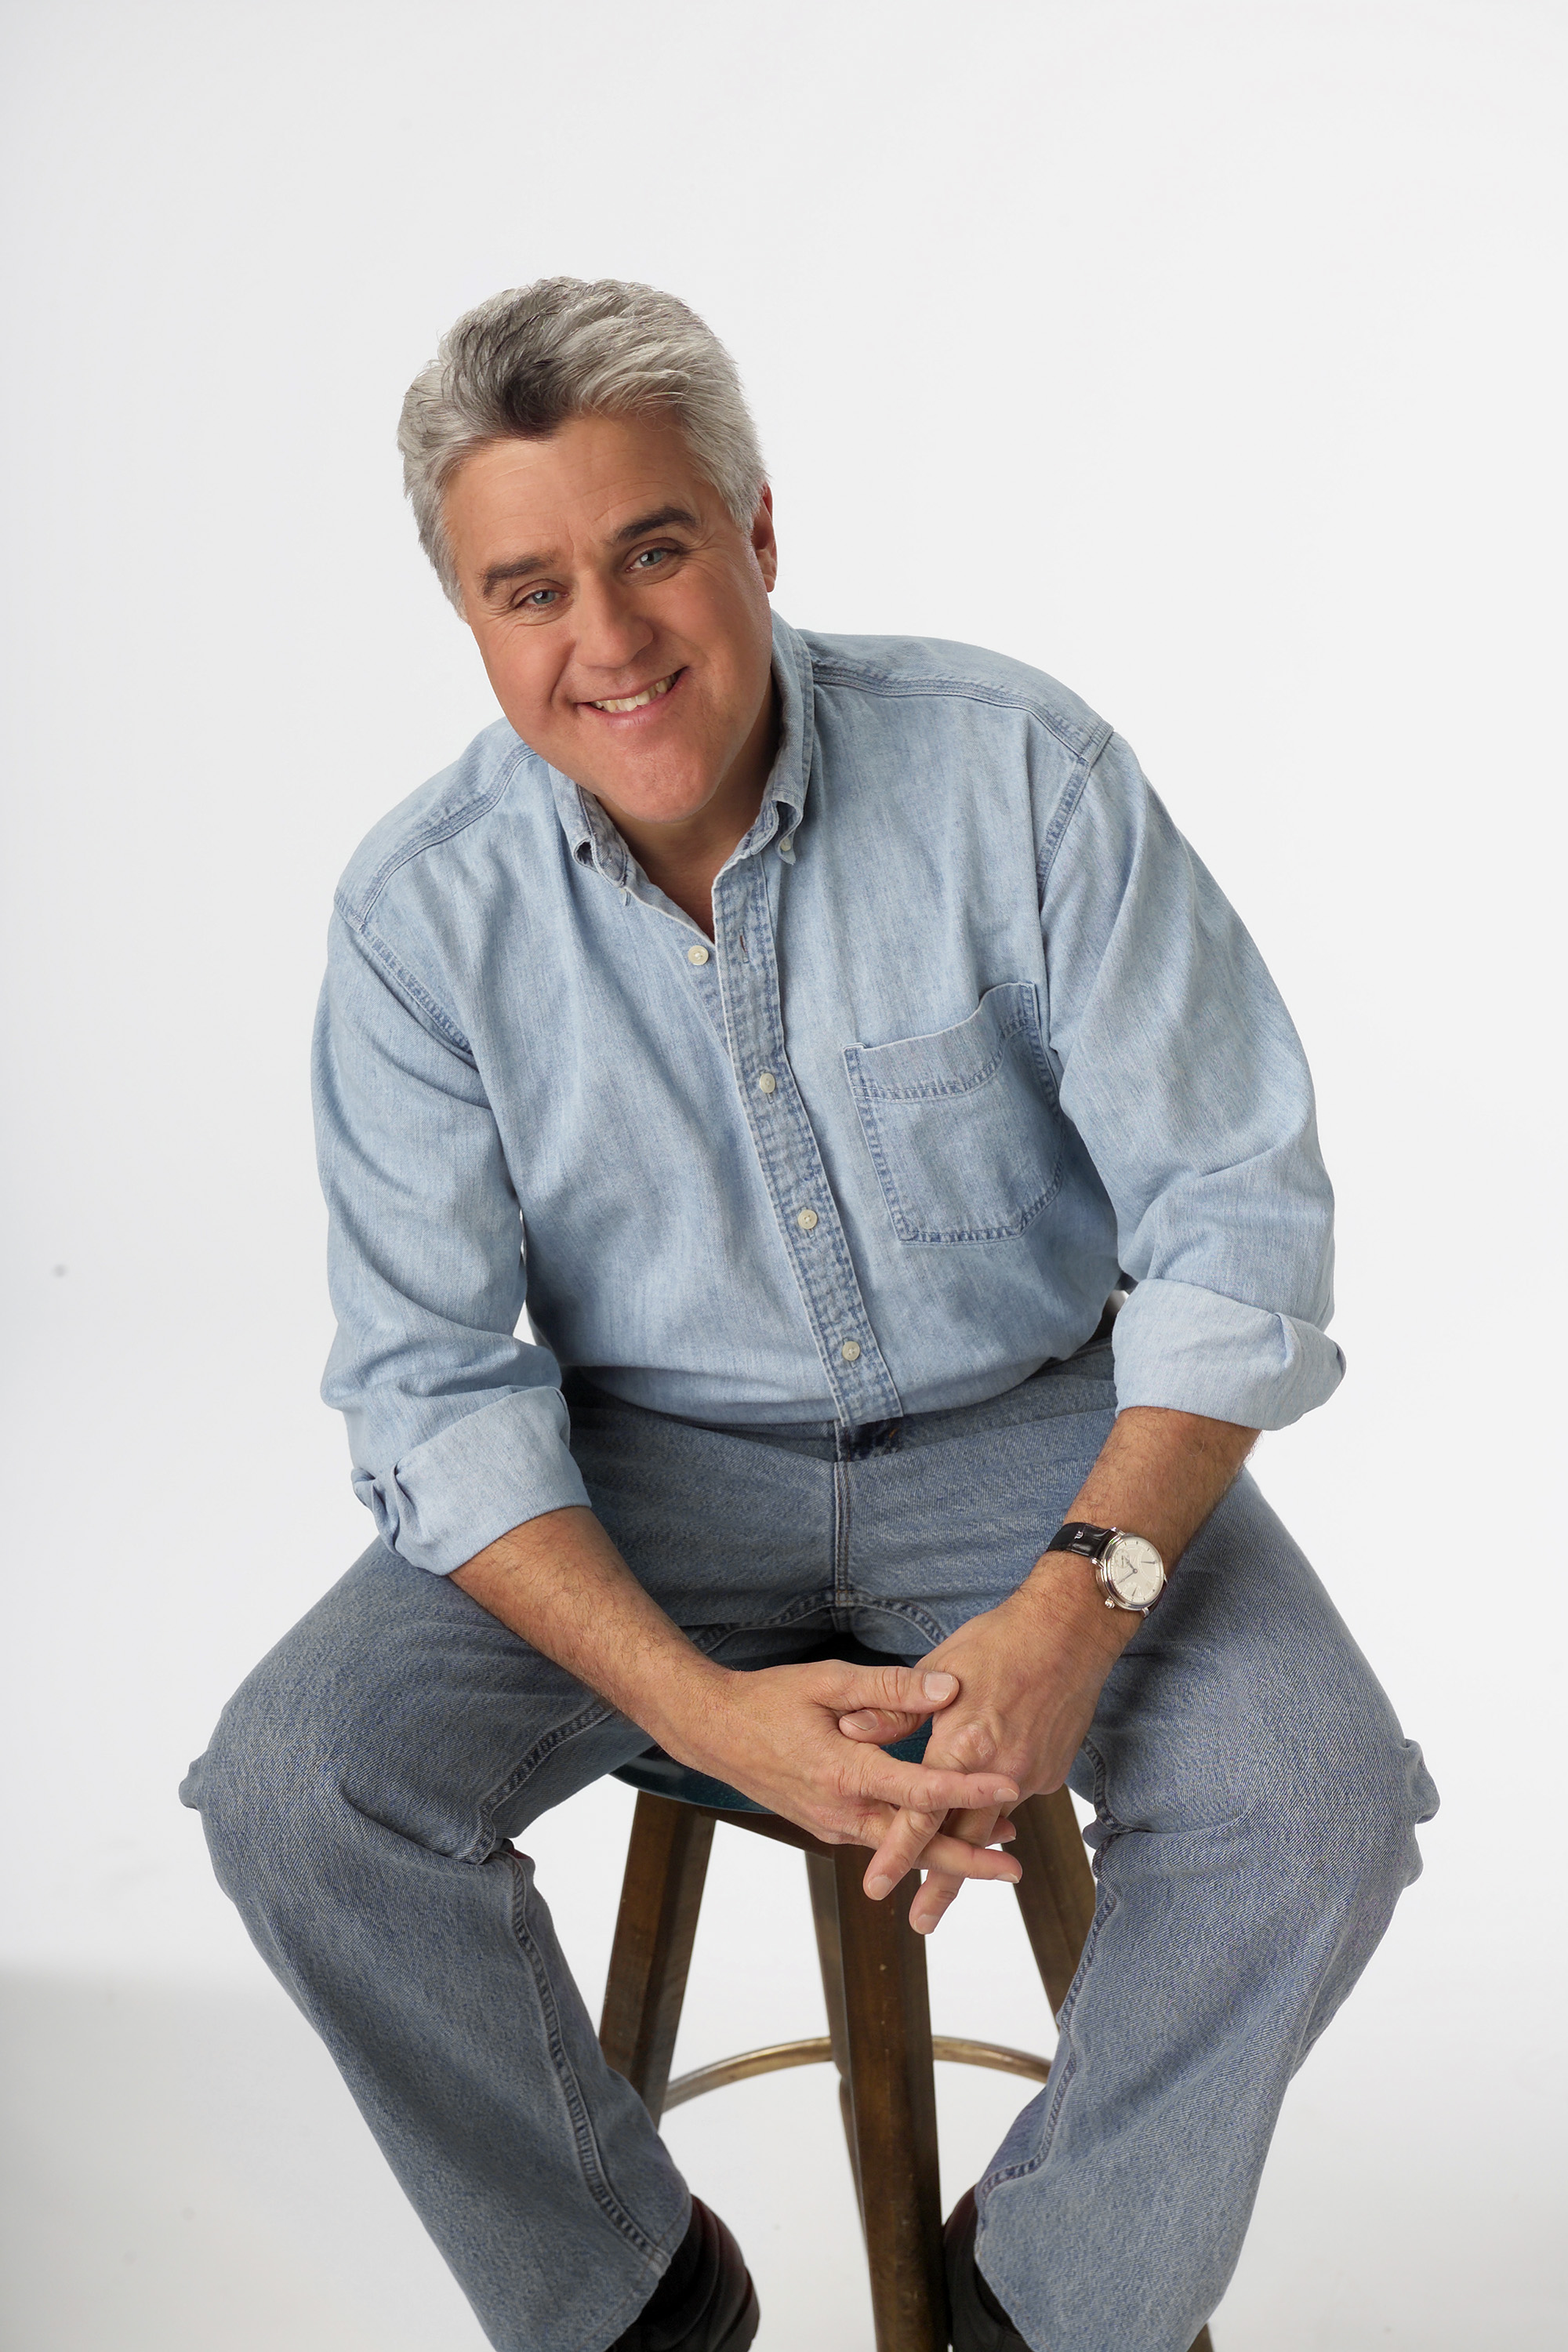 Jay Leno | Source: Getty images